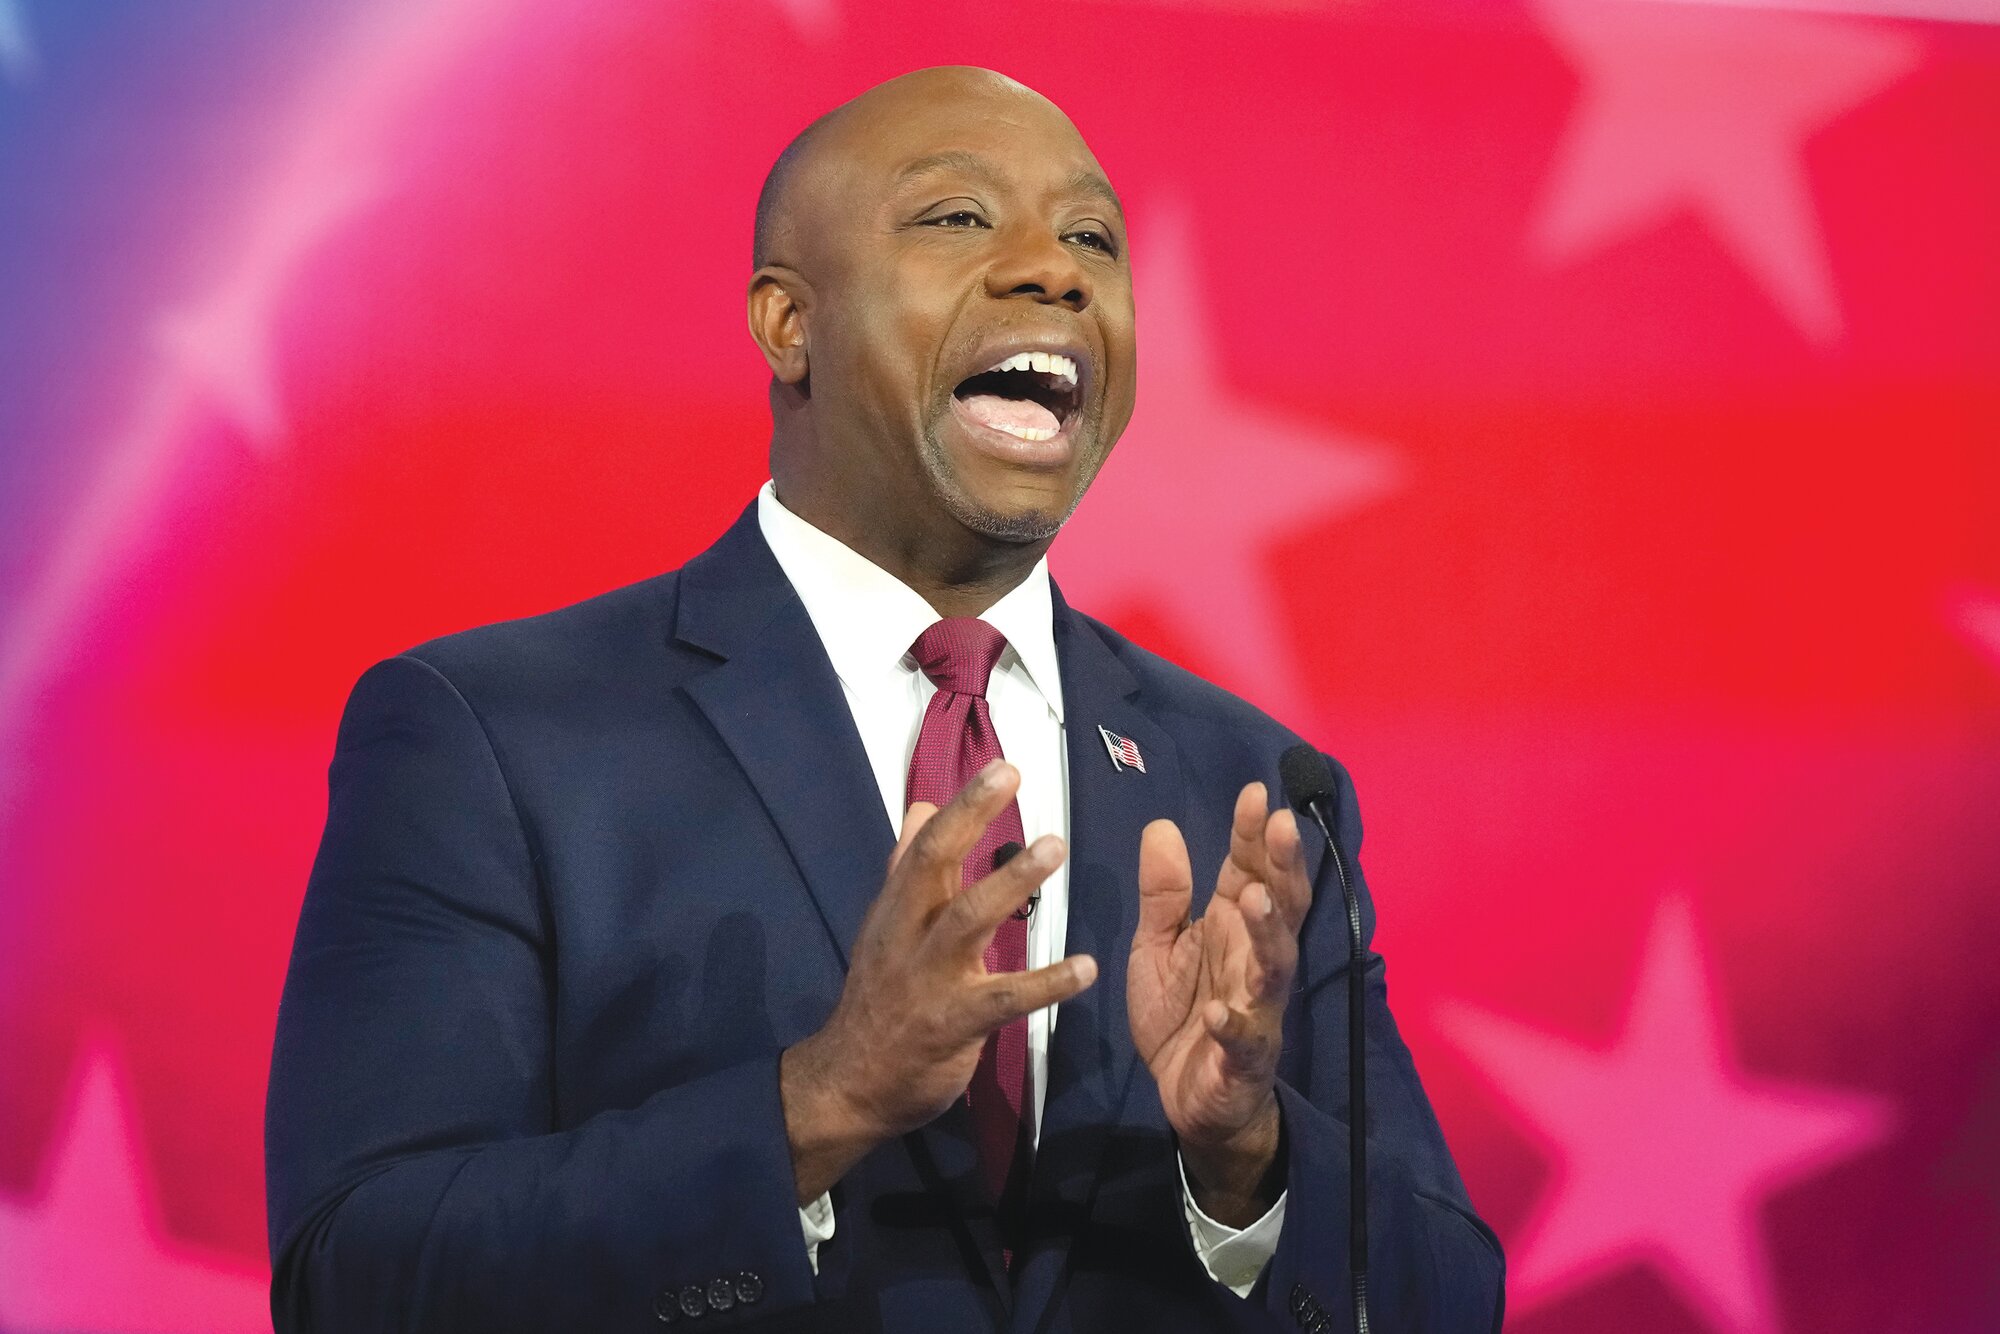 Republican presidential candidate Sen. Tim Scott, R-S.C., speaks during a Republican presidential primary debate hosted by NBC News on Nov. 8 at the Adrienne Arsht Center for the Performing Arts of Miami-Dade County in Miami. Scott said Sunday he is ending his campaign for the GOP presidential nomination.